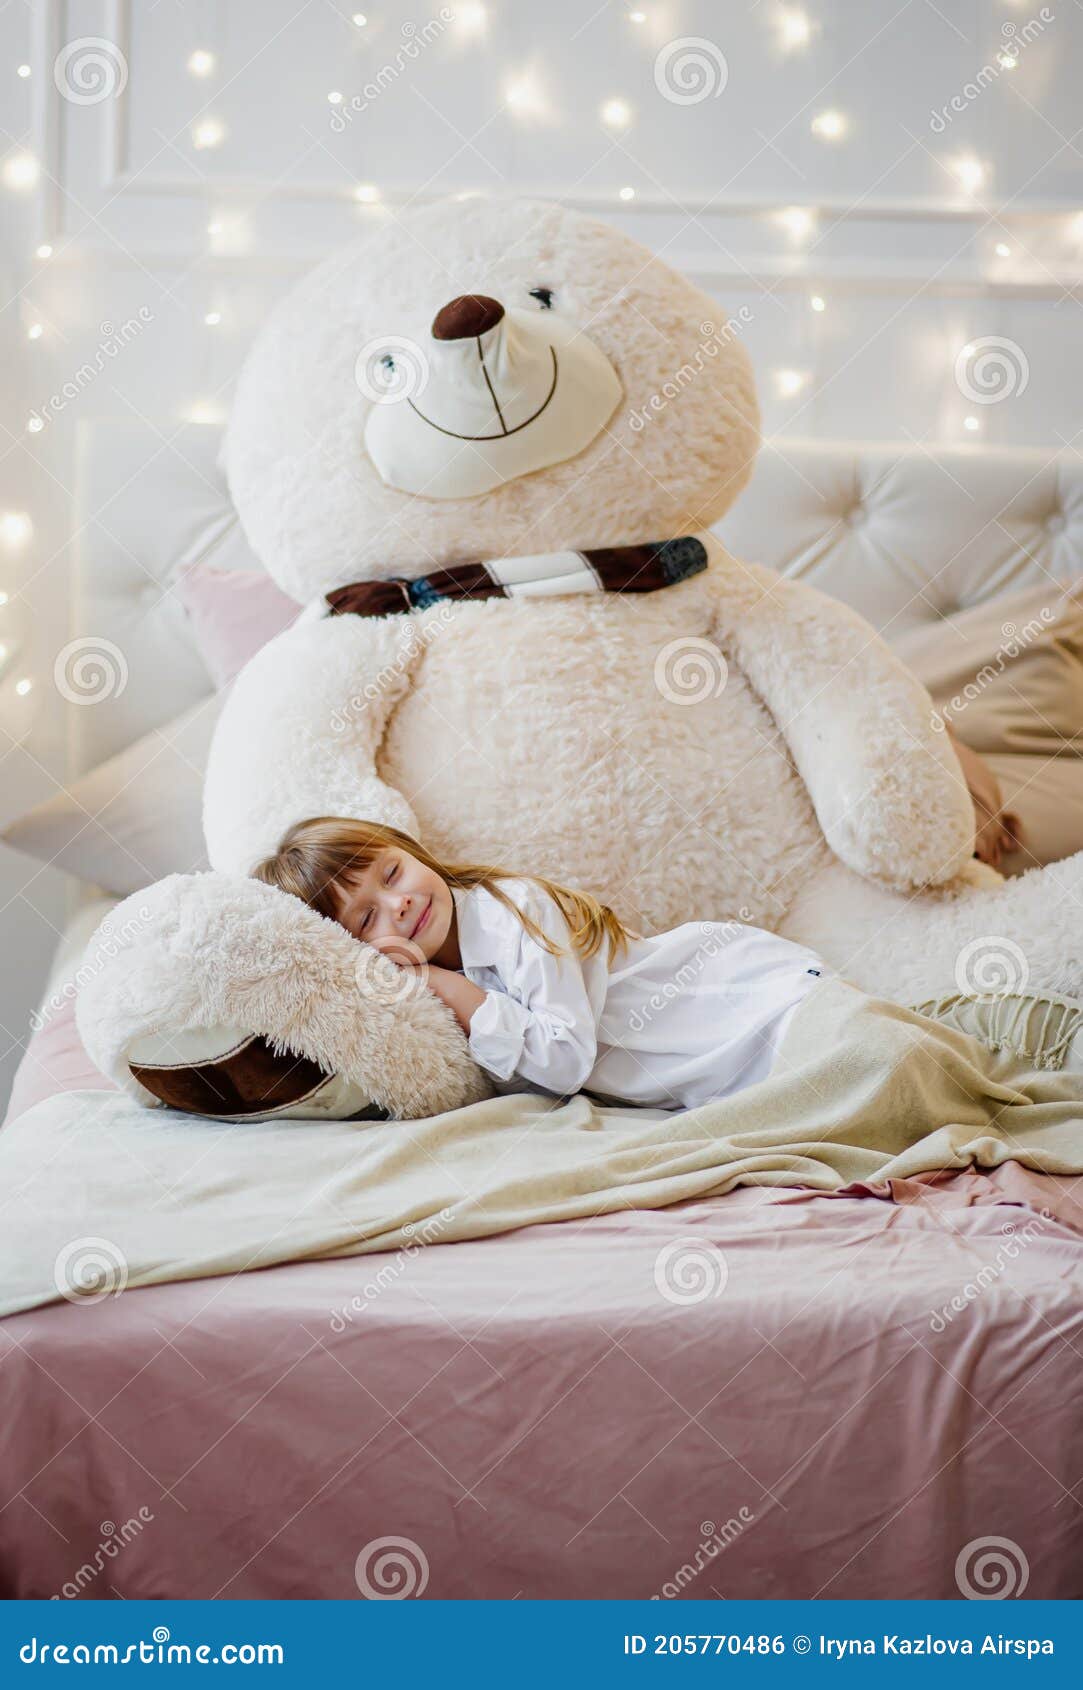 Sleeping Girl at Home at Christmas Time with Large Teddy Bear ...